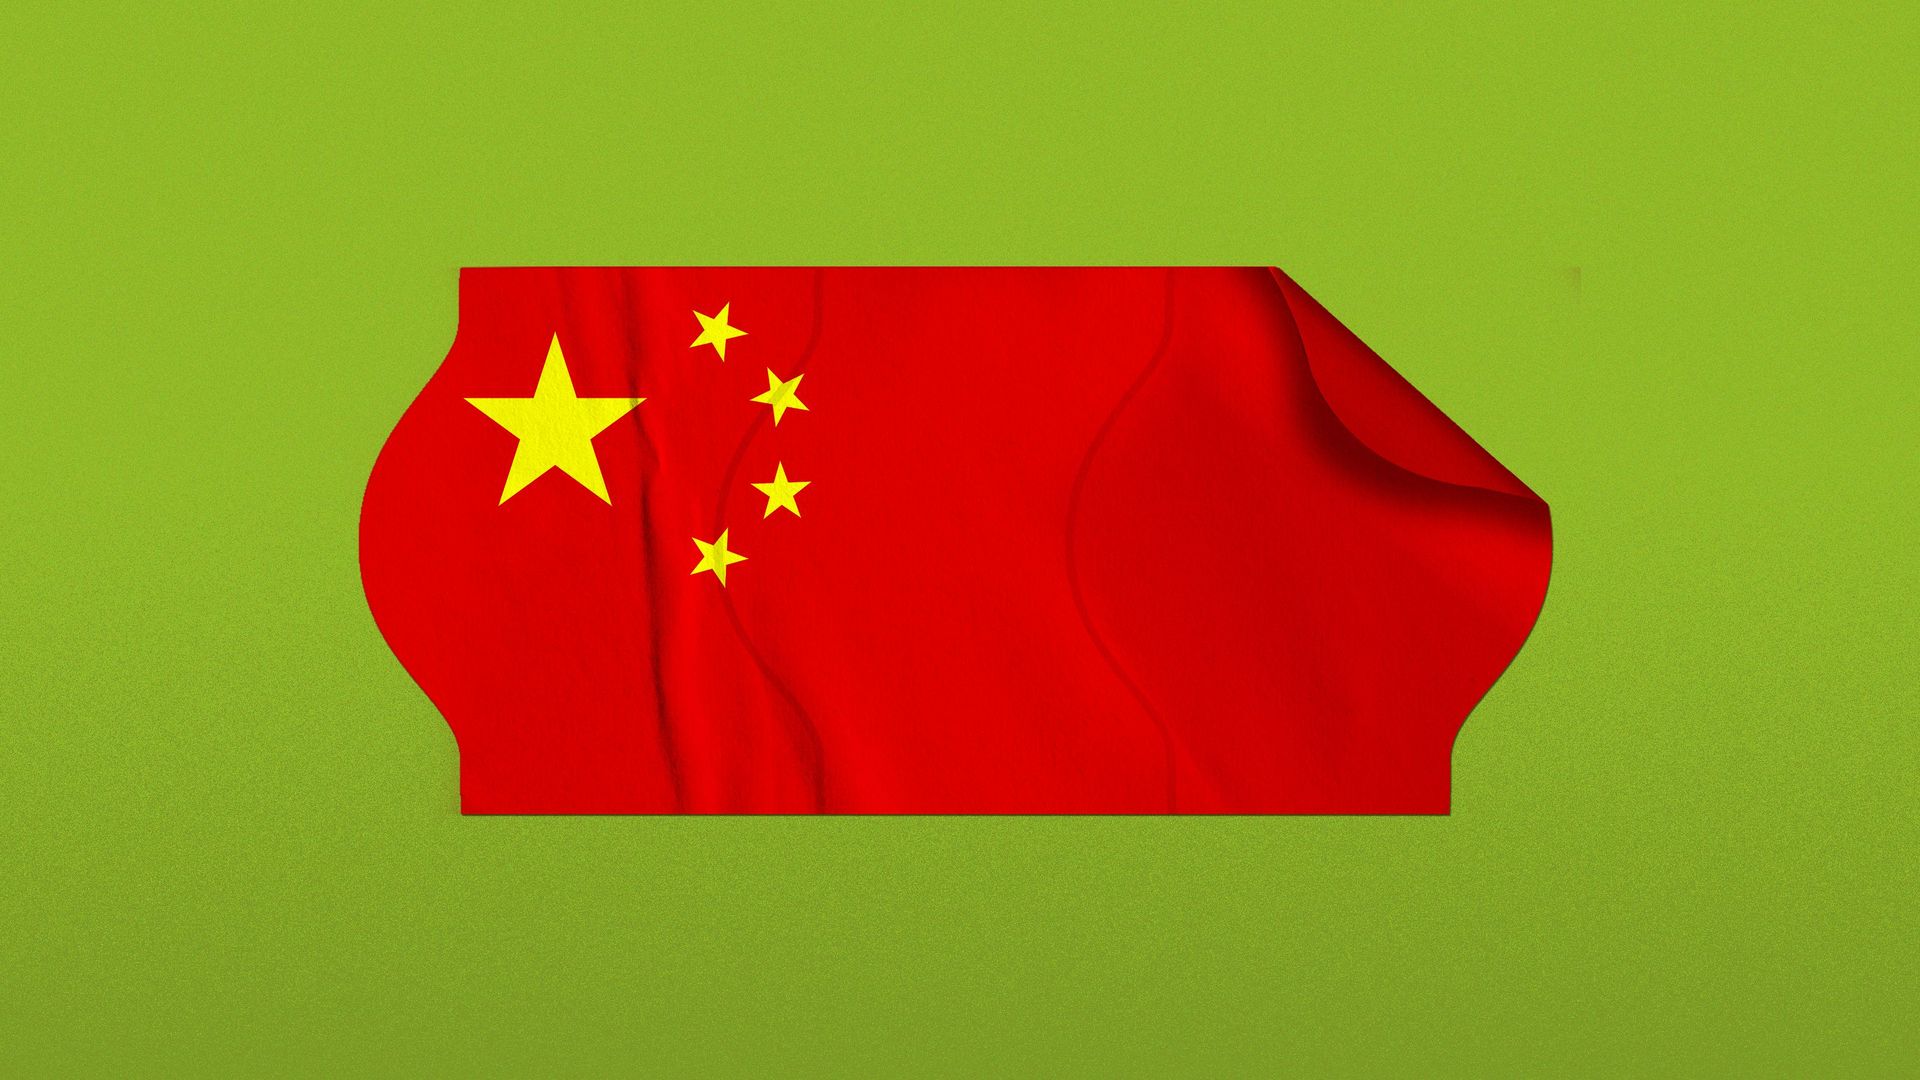 Illustration of a price tag sticker with the flag of China, being peeled off.